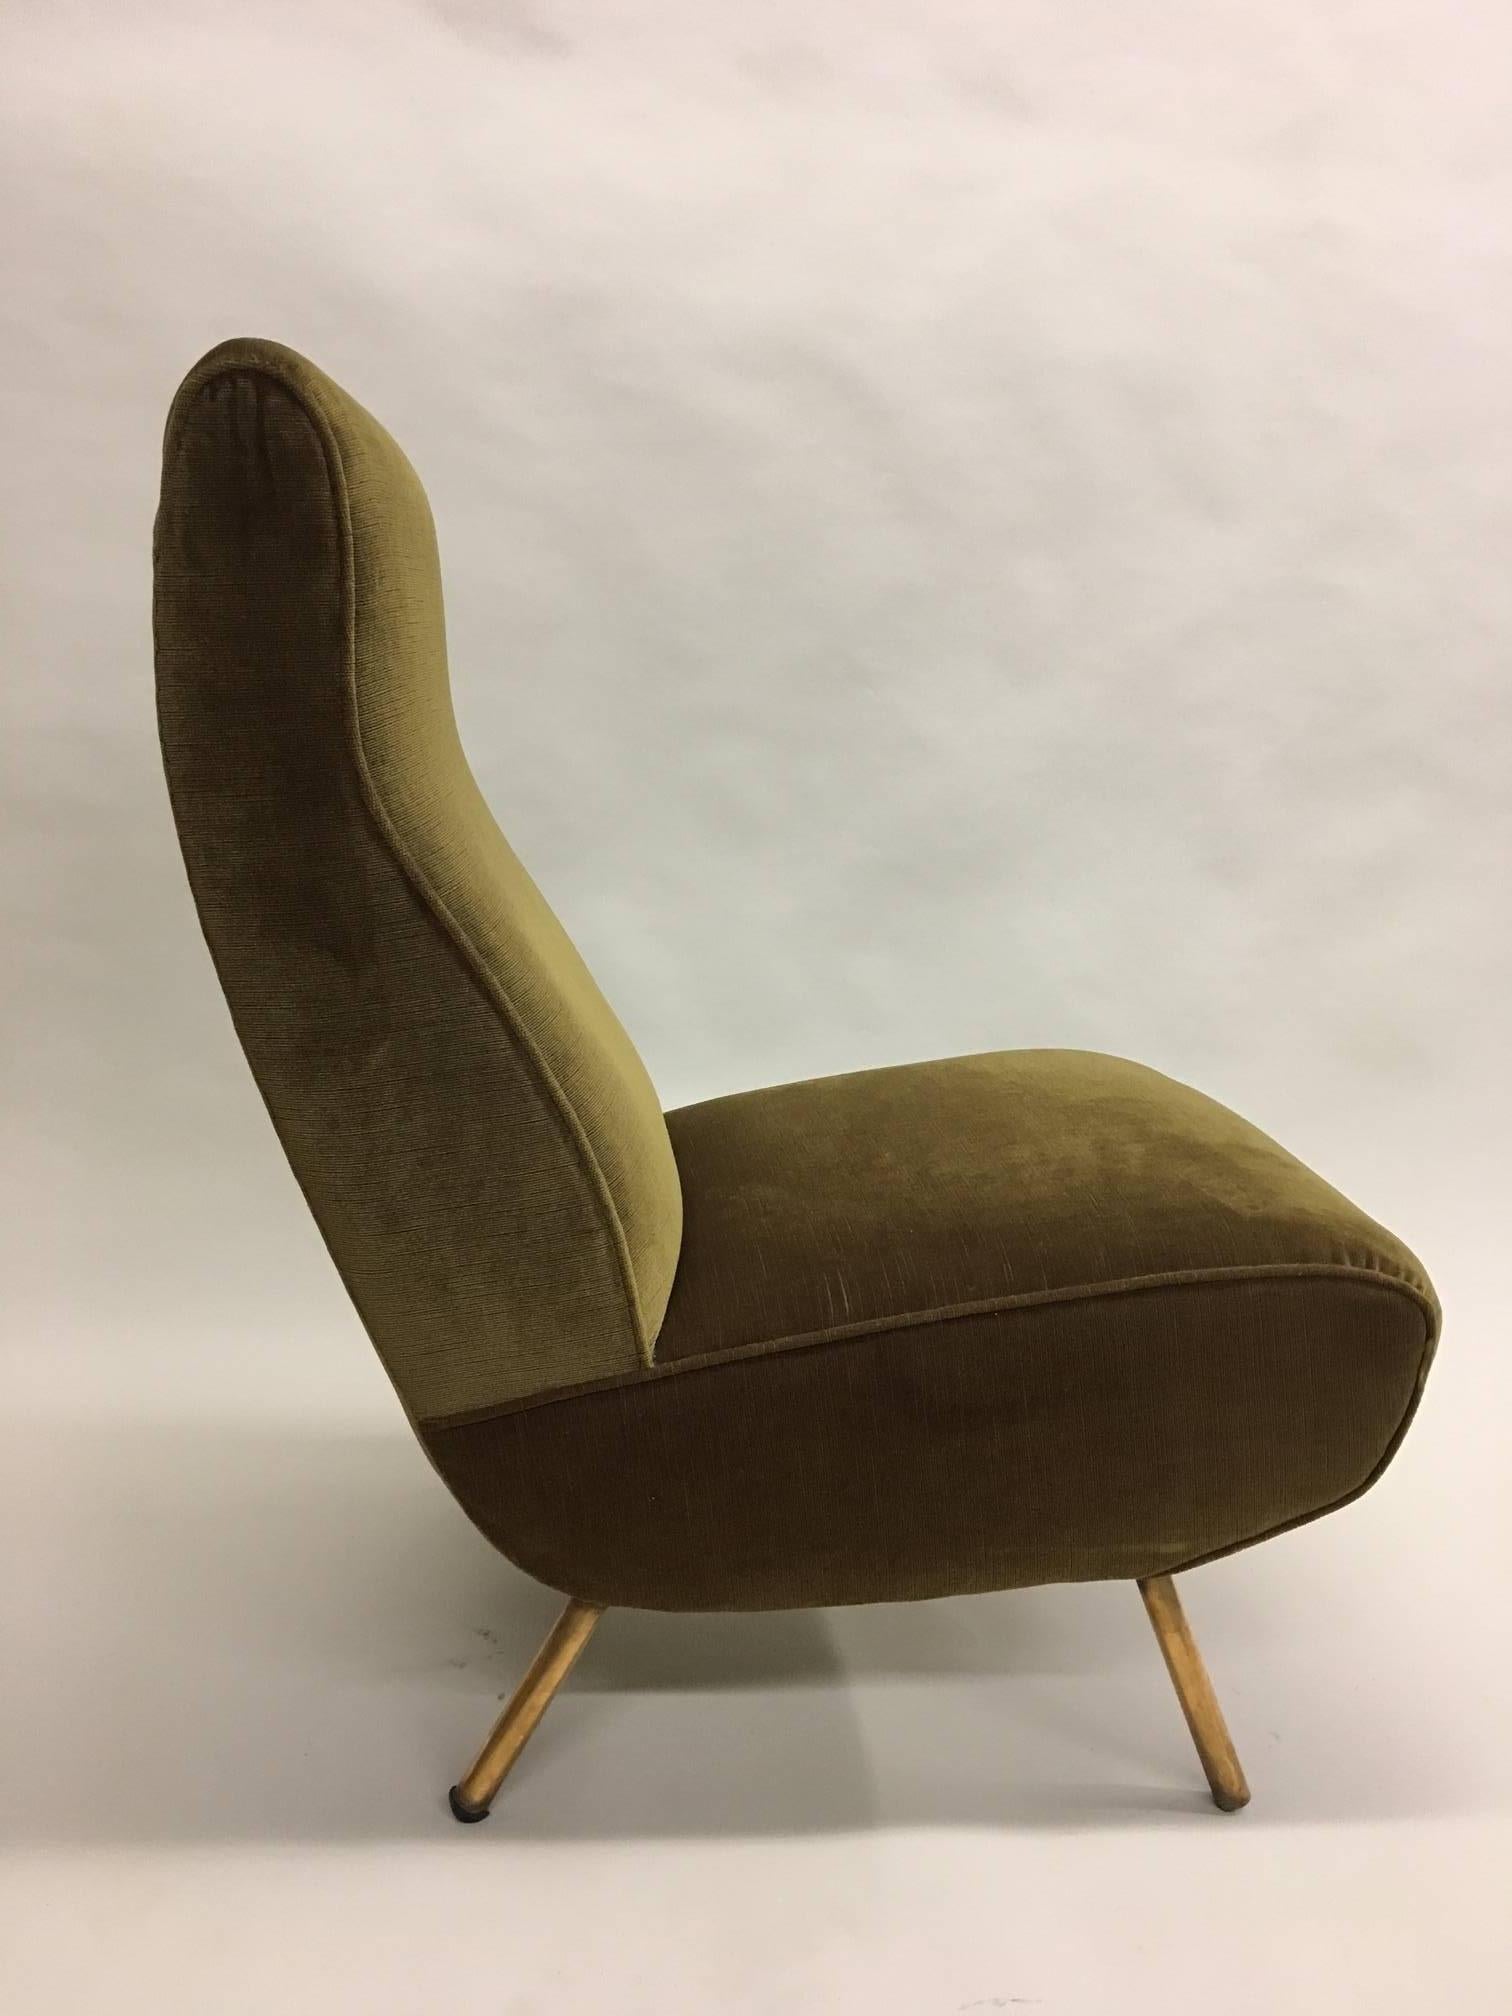 20th Century Rare Pair of Mid-Century Modern Triennale Lounge Chairs, Marco Zanuso Italy 1951 For Sale